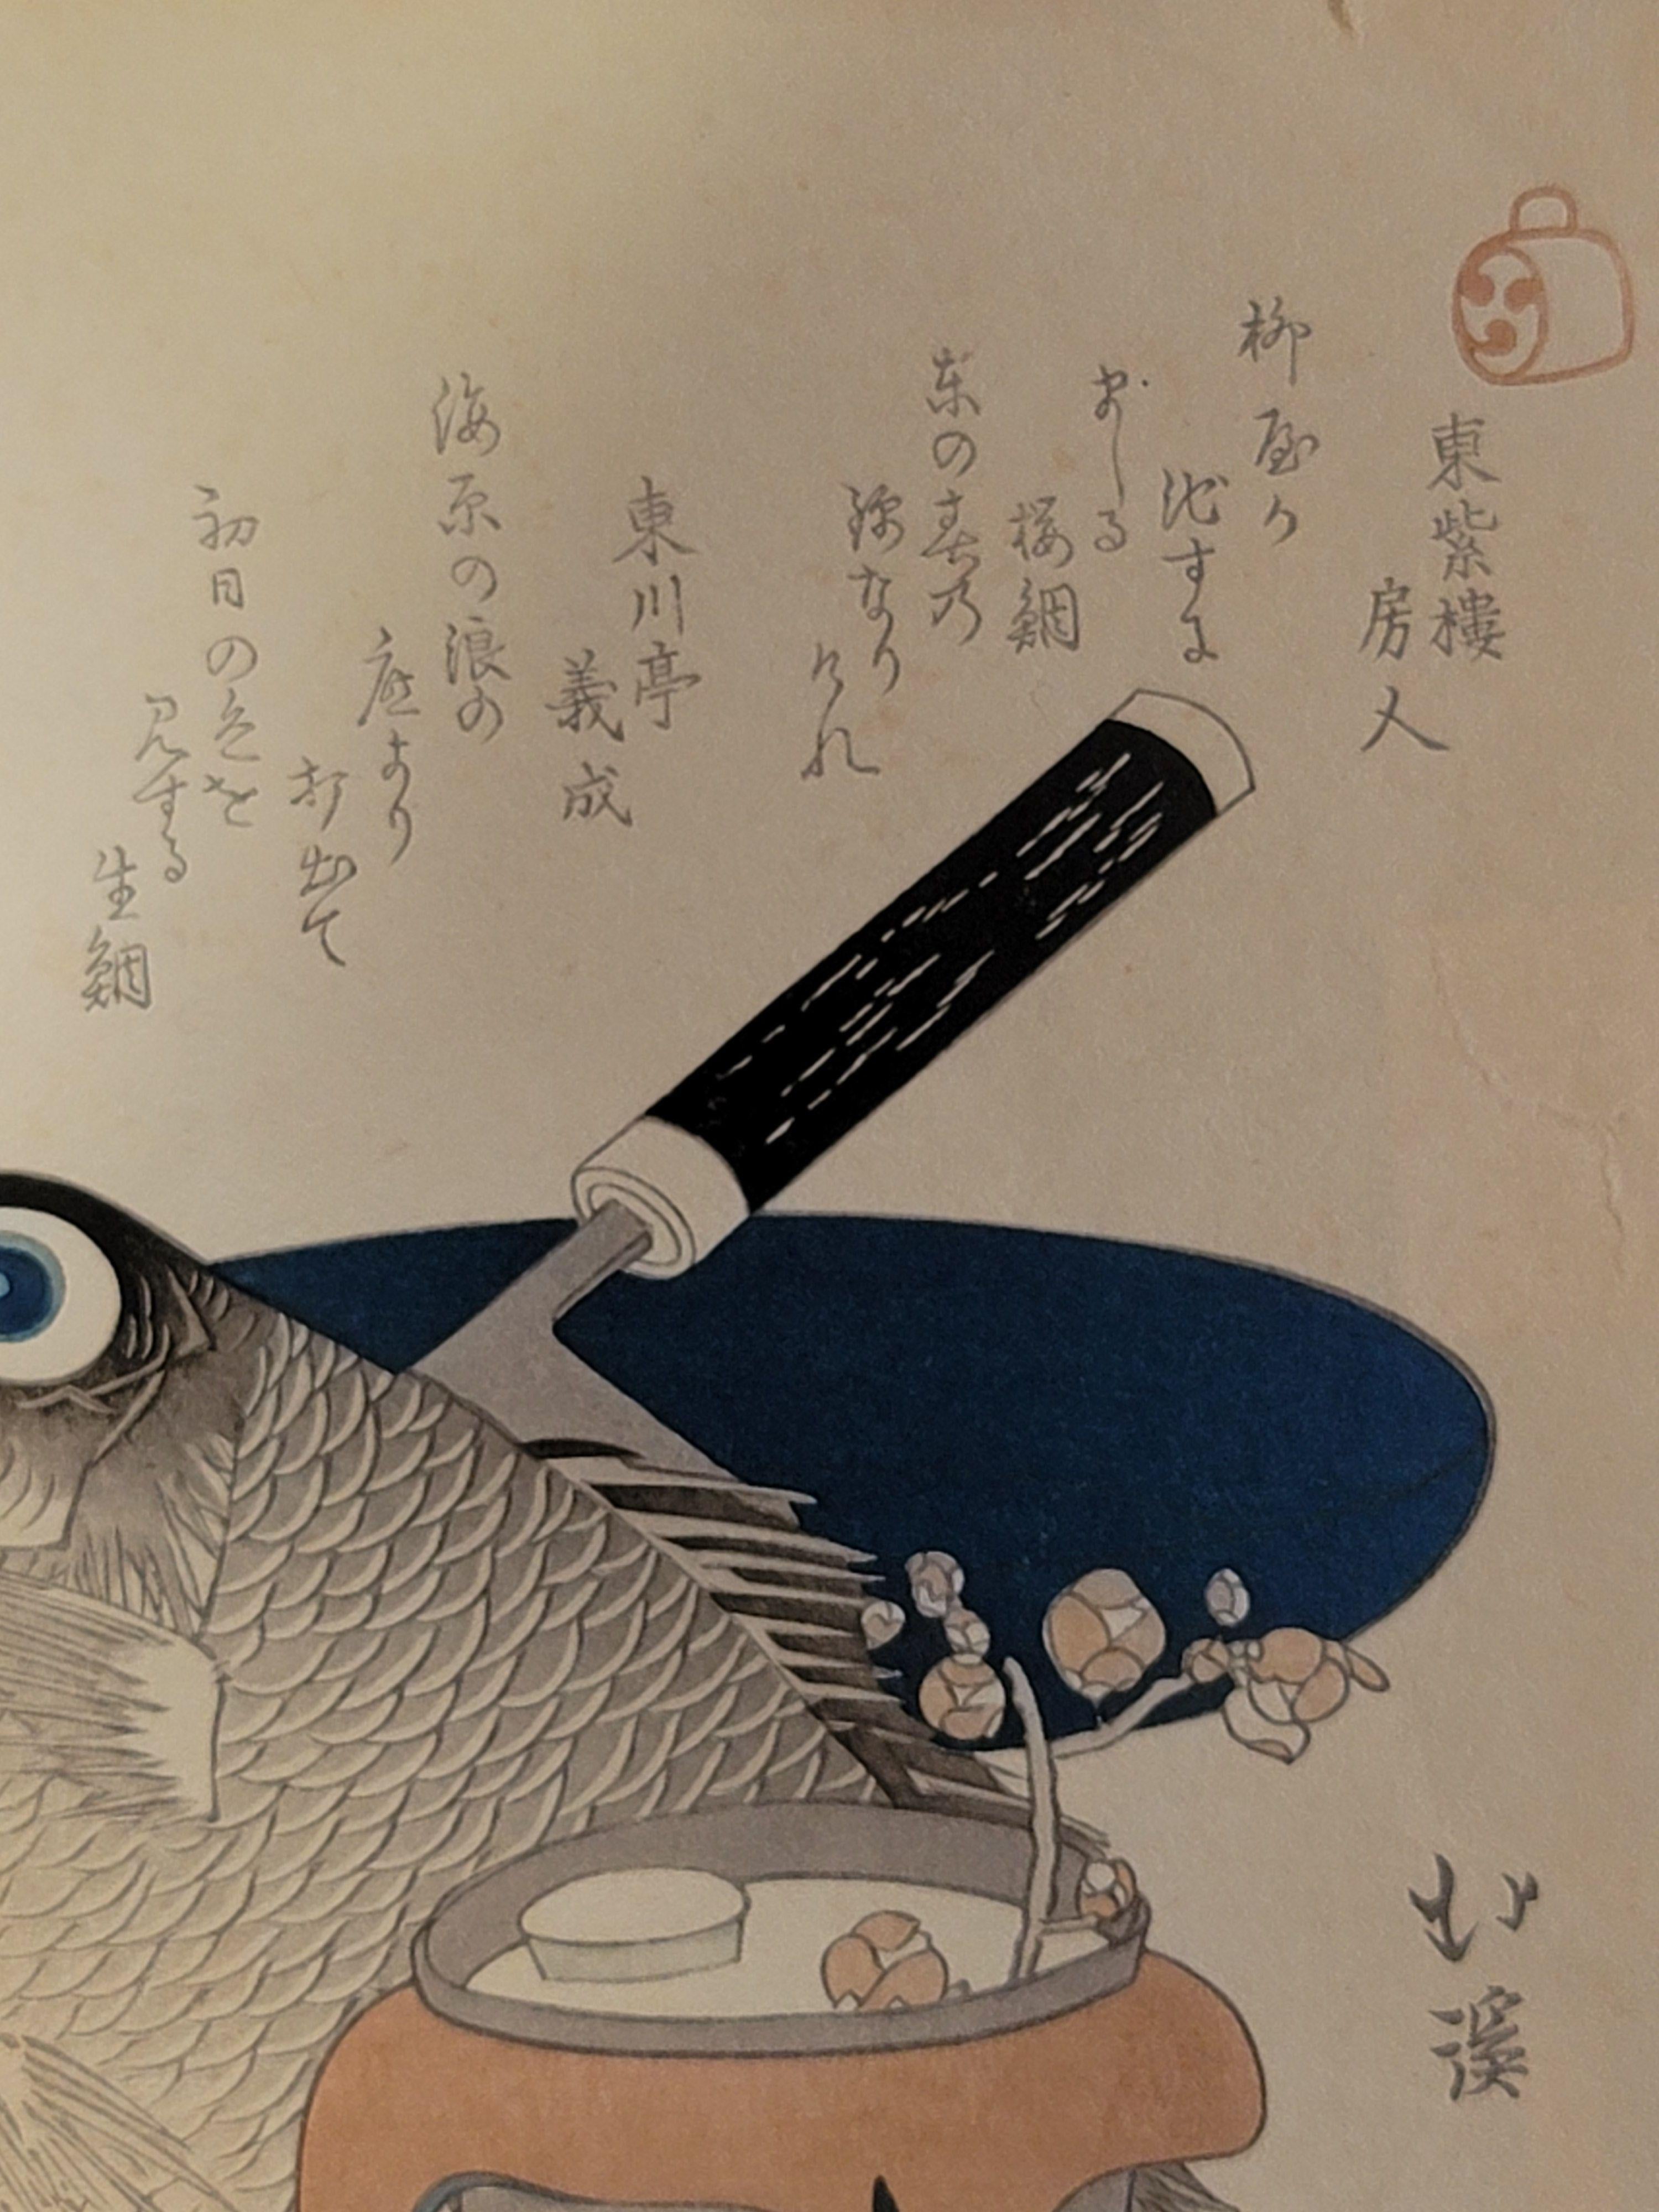 Hand-Carved Japanese Woodblock Print by Totoya Hokkei 魚屋北溪 '1780-1850' For Sale